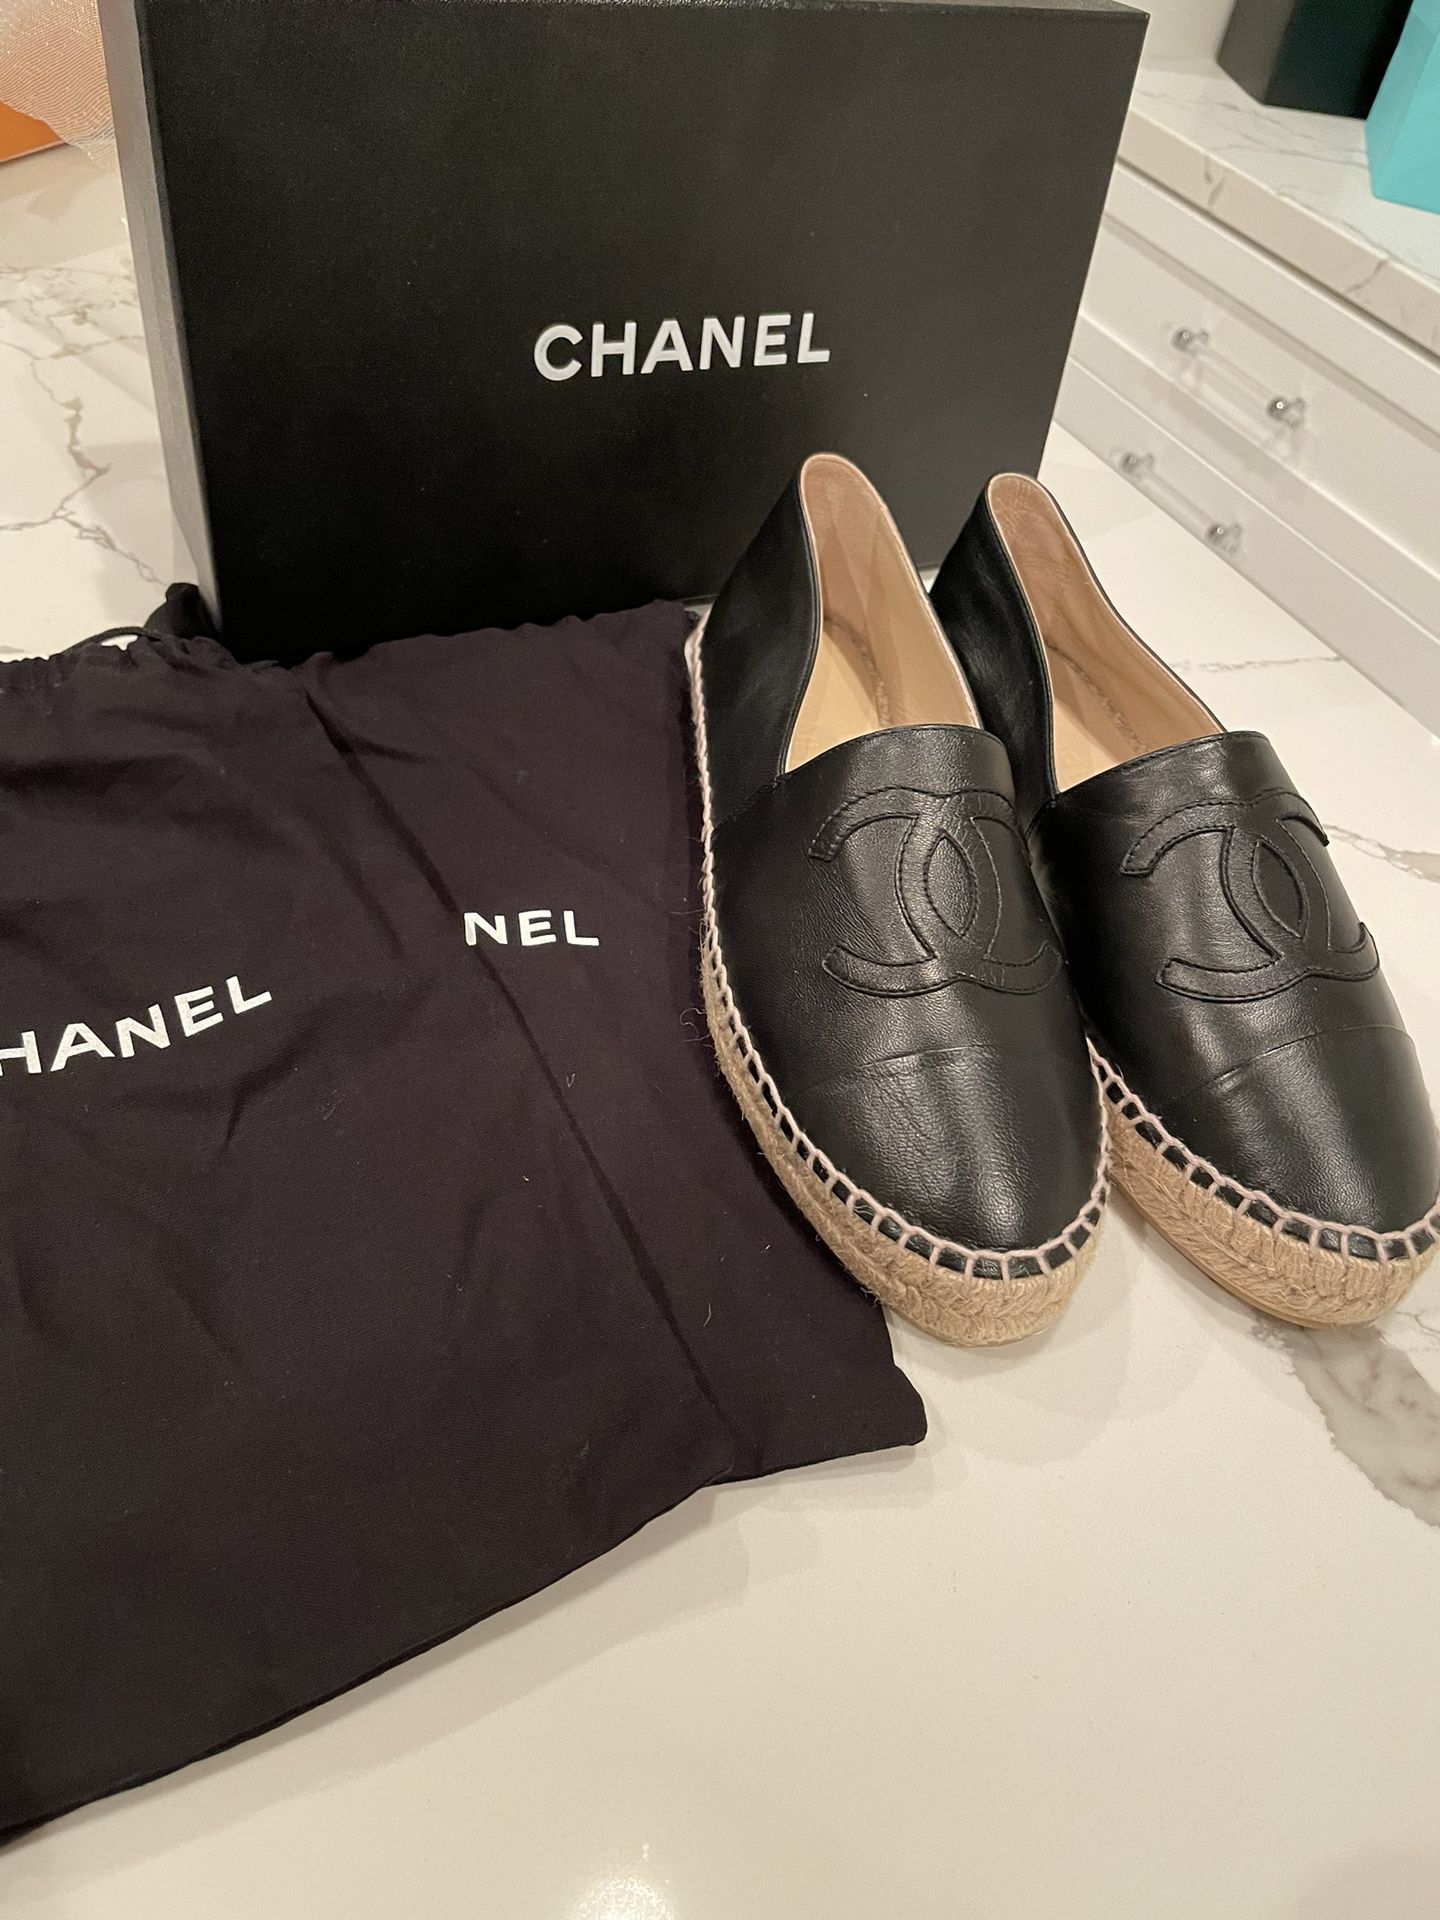 Authentic Chanel Espadrilles Size 39 Brand New for Sale in San